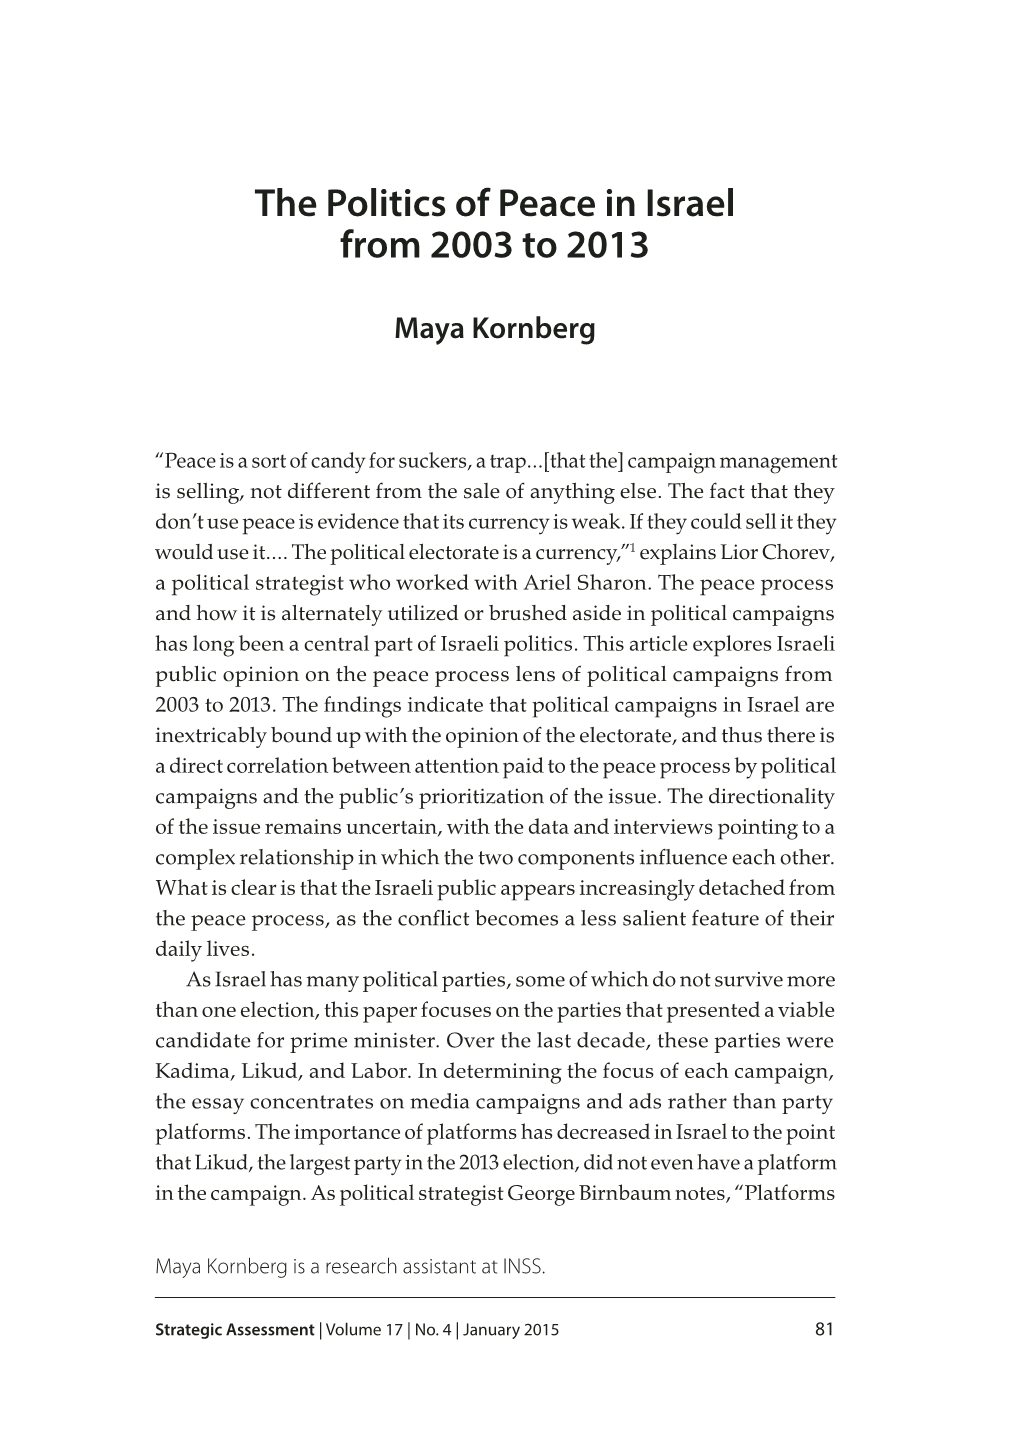 The Politics of Peace in Israel from 2003 to 2013